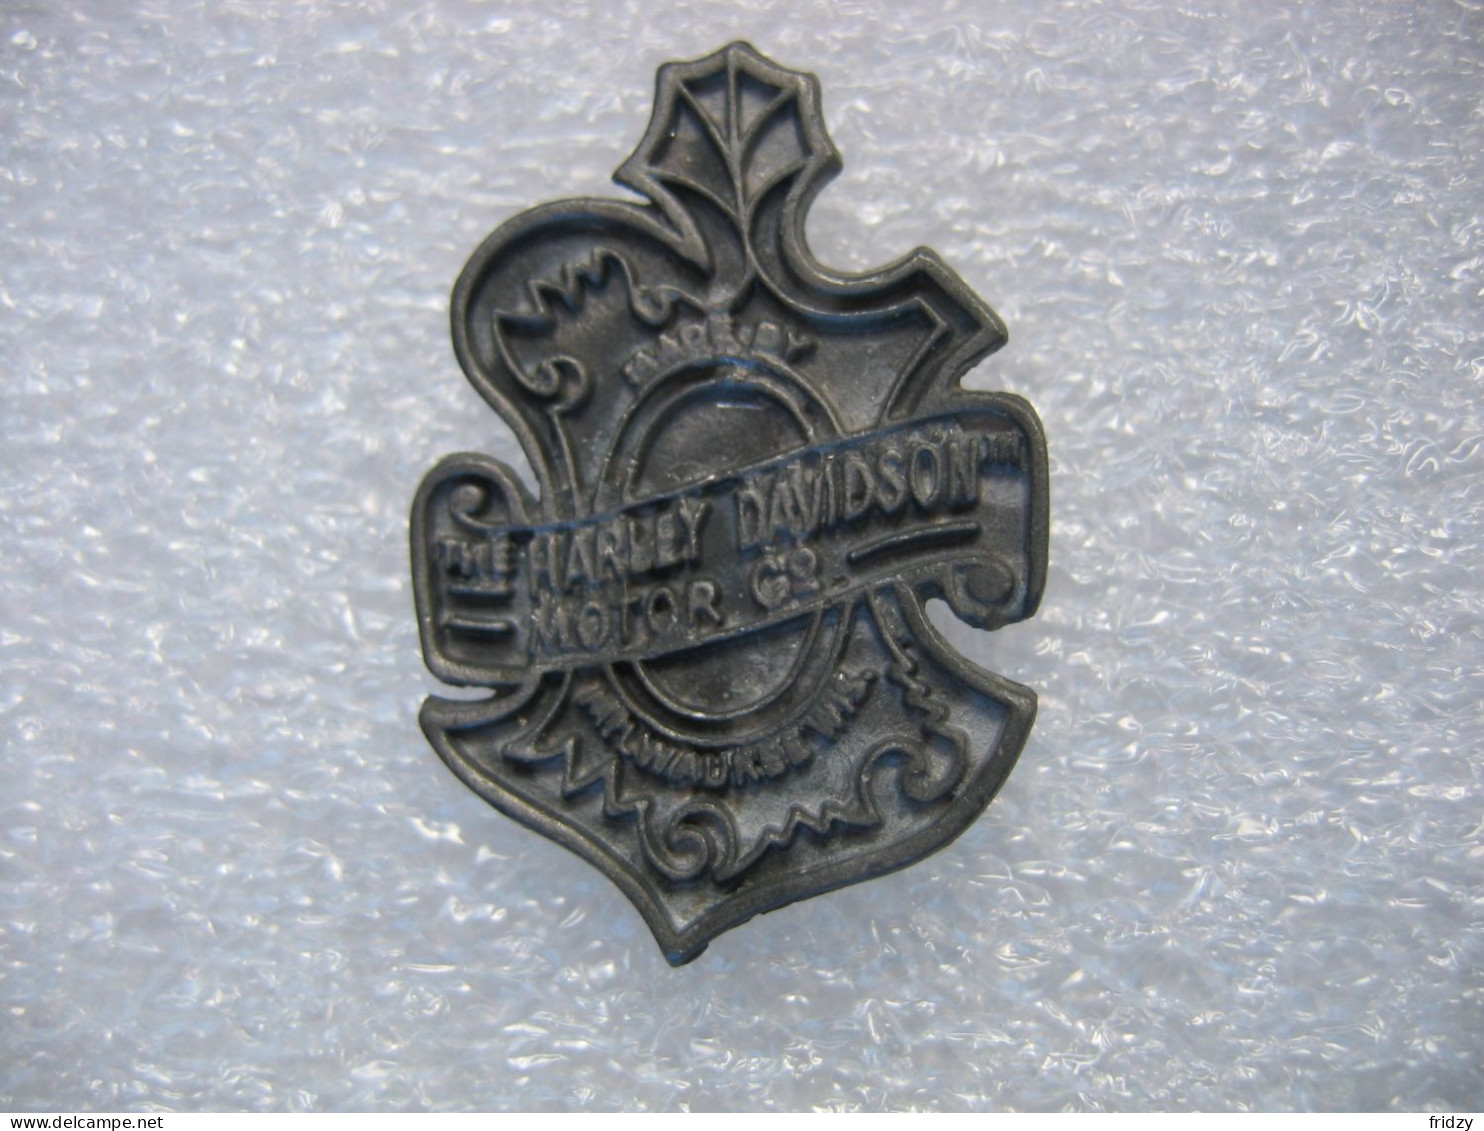 Pin's à 2 Attaches Et En étain. "The Harlay Davidson Motor And Cie". Made By Milwauree Wis - Motorräder